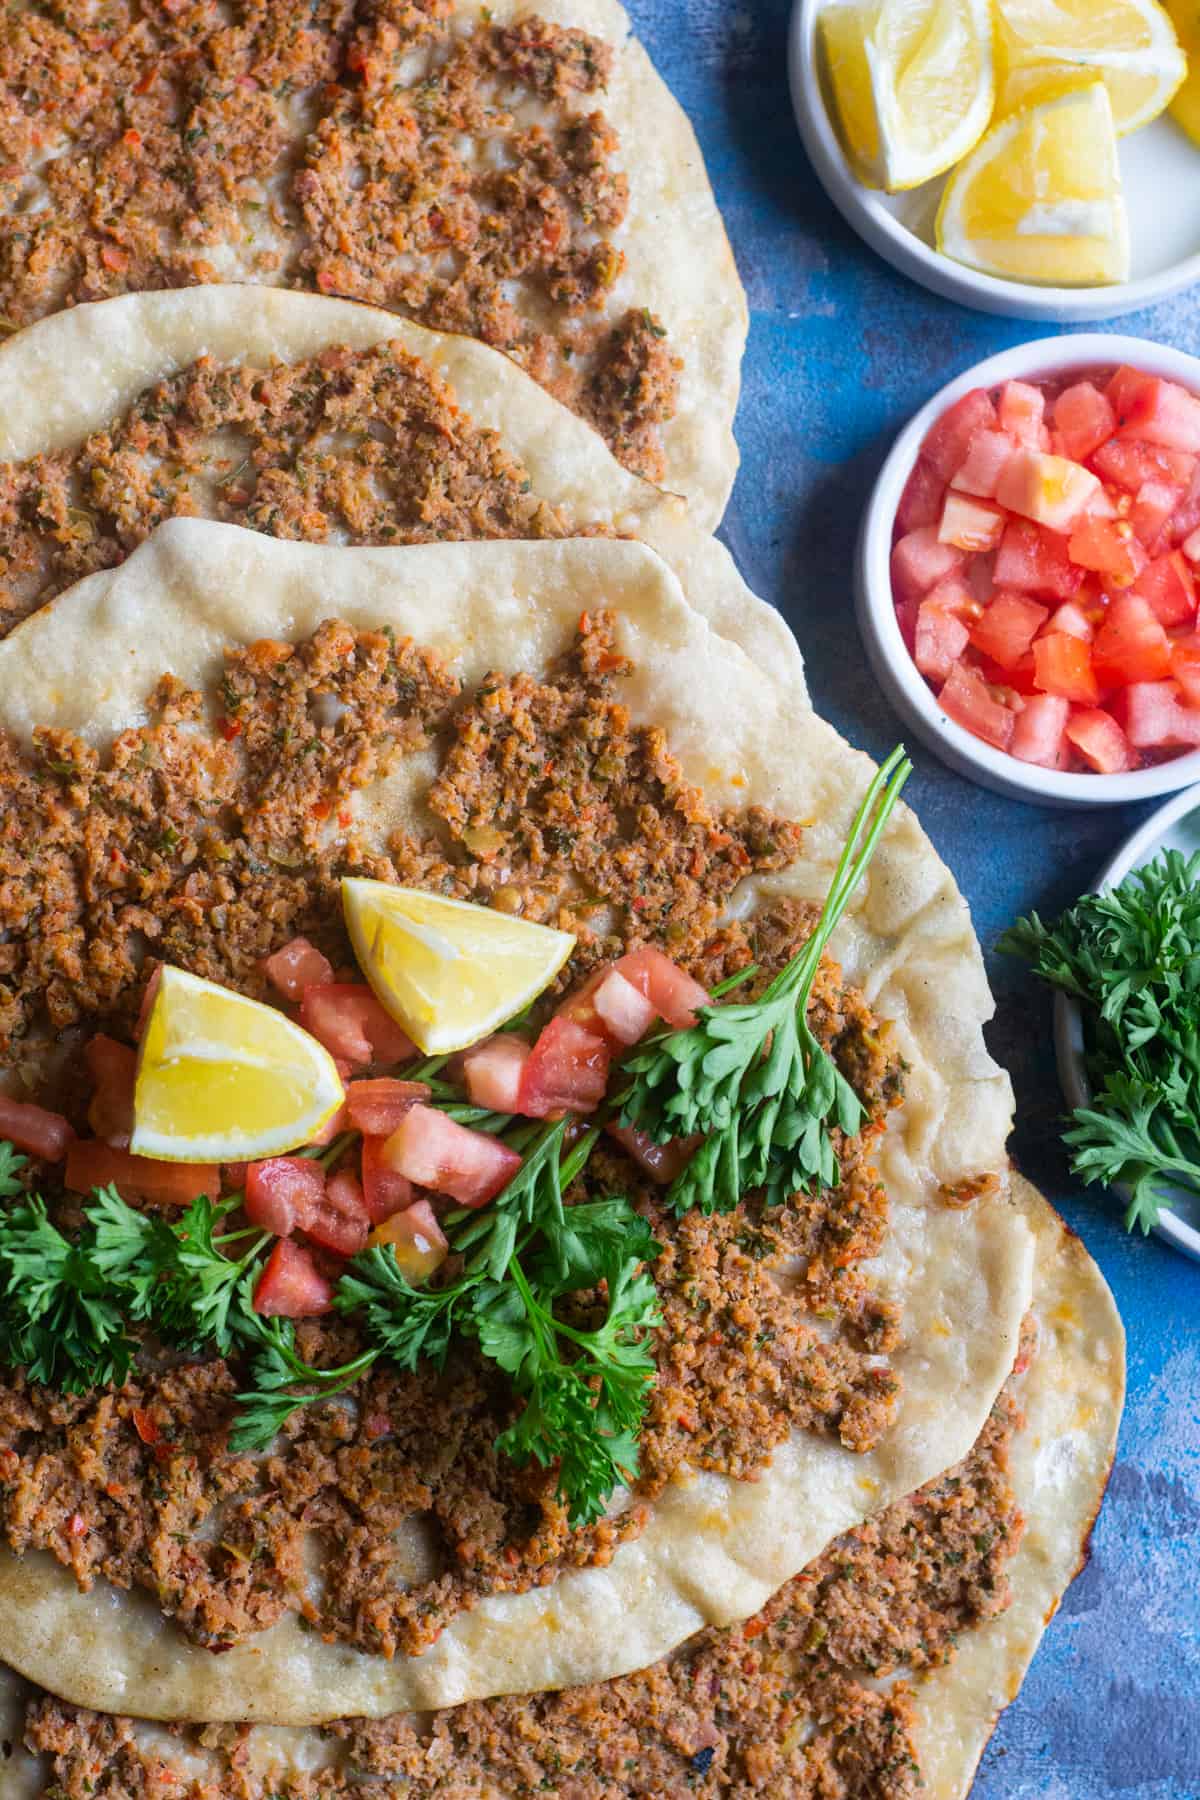 Lahmacun is thin and crispy flatbread bursting with flavor. Topped with meat, parsley, peppers, tomatoes and a mixture of delicious spices, this Turkish pizza is a must-try!